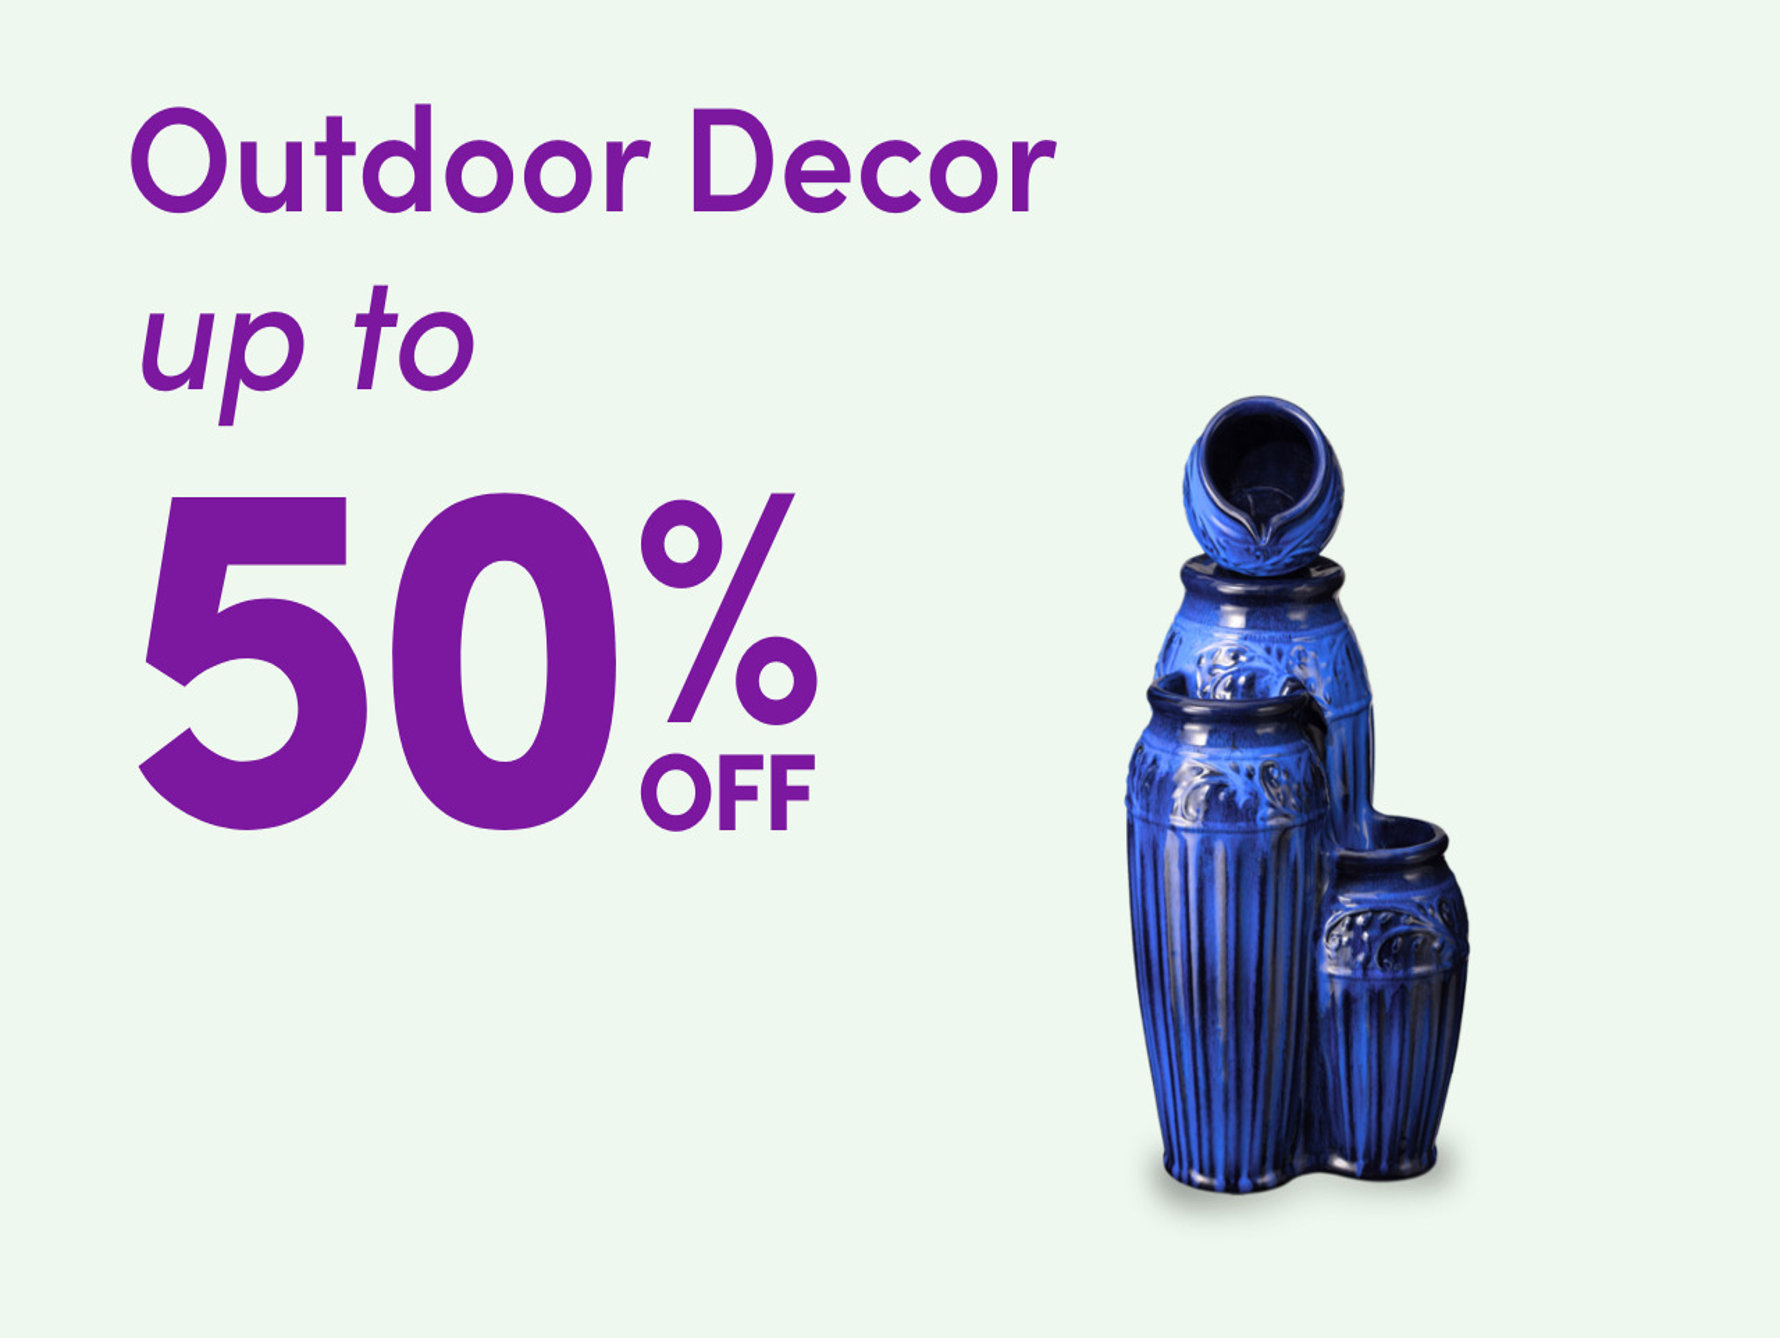 Outdoor Decor up to 50% off